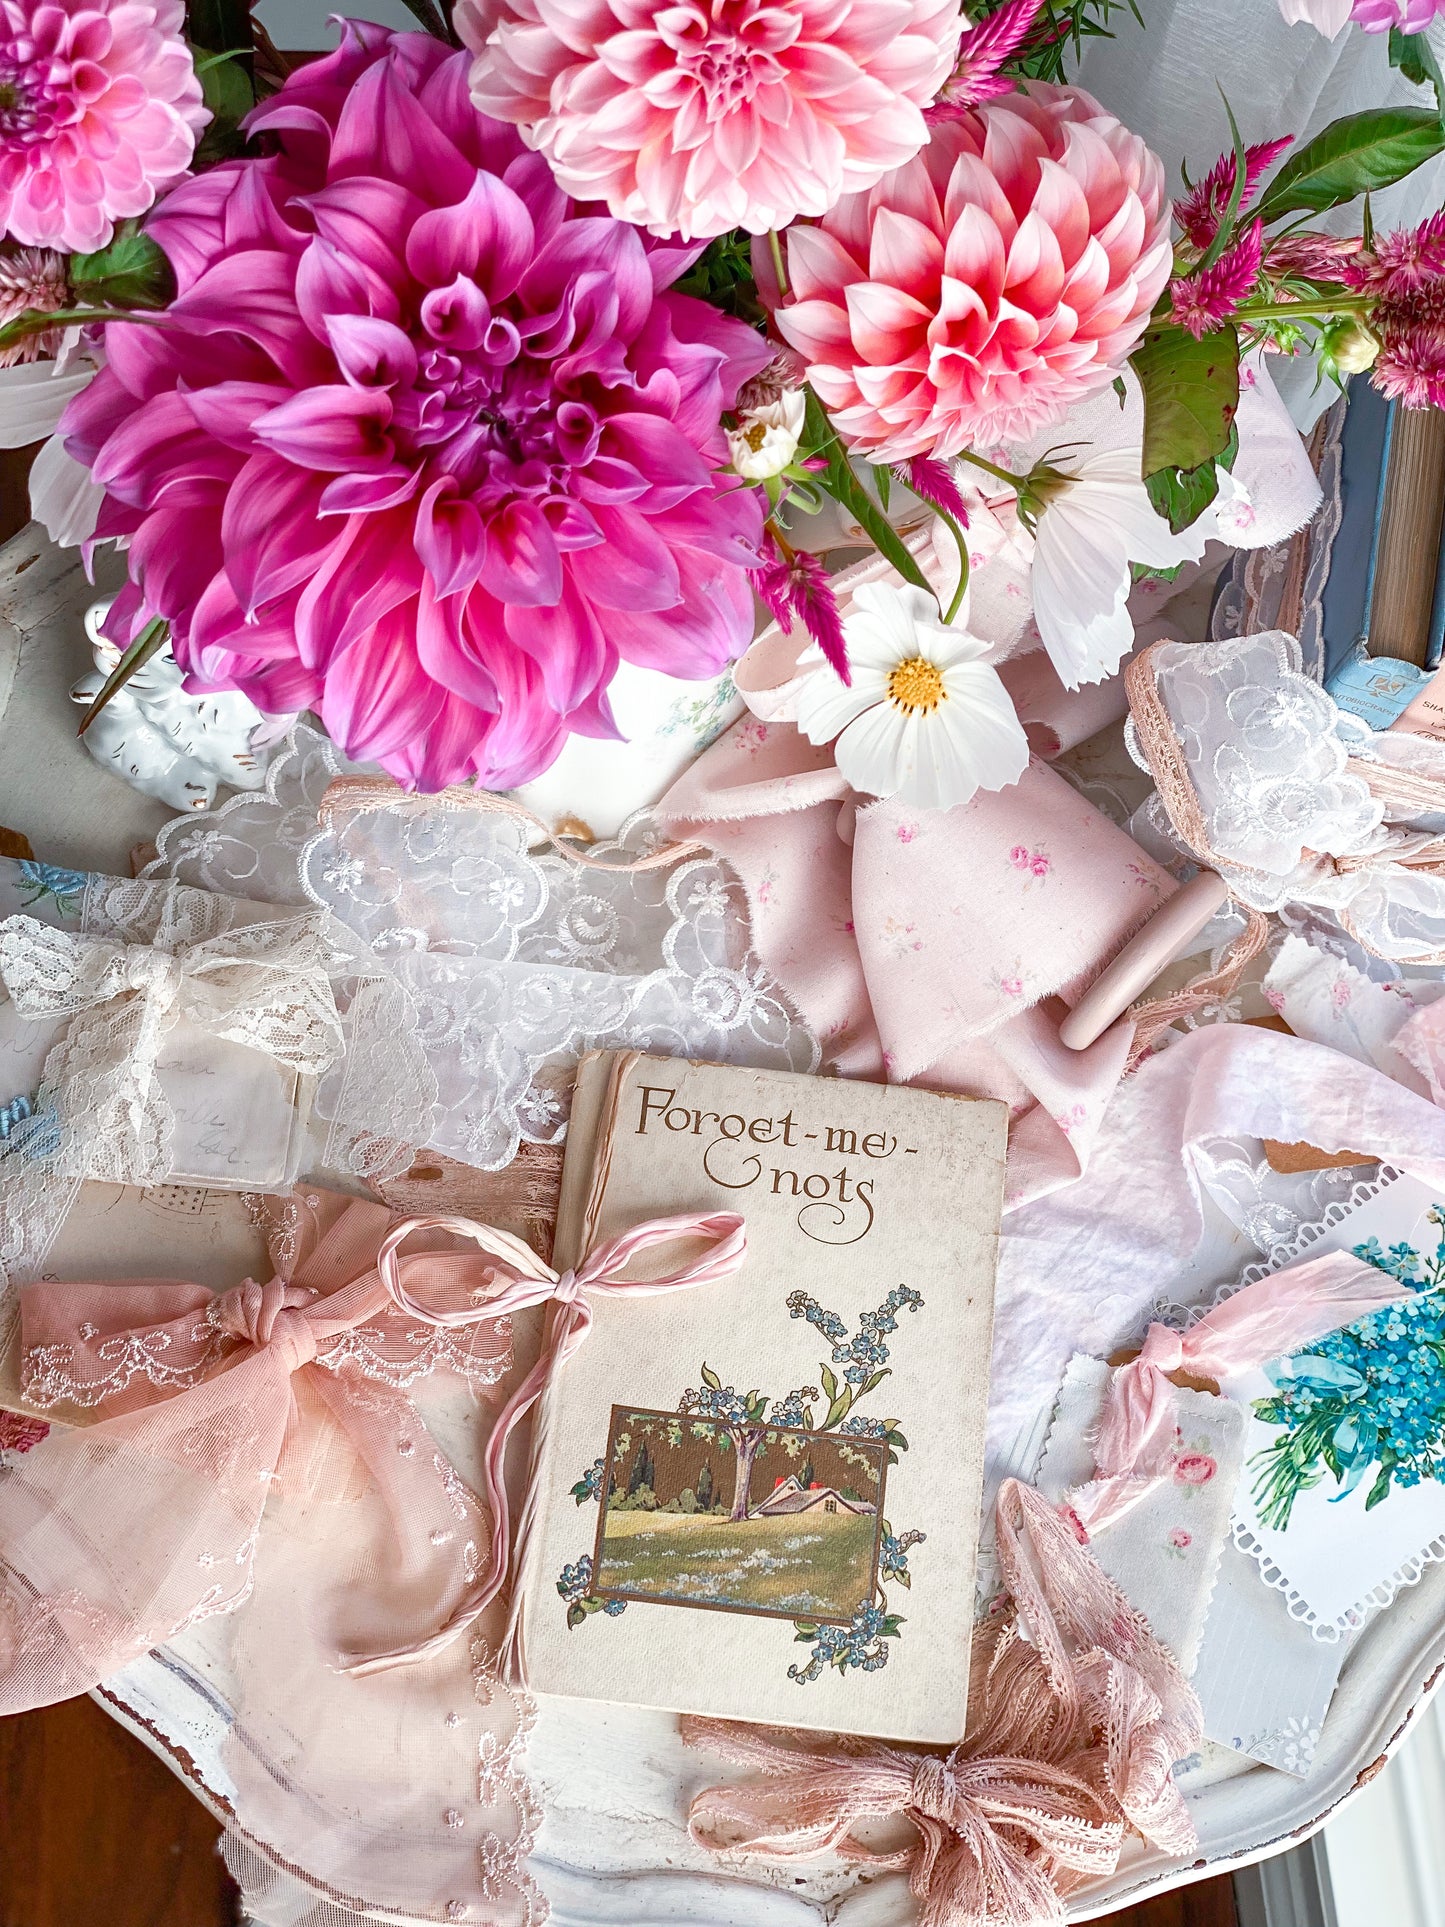 Forget-me-nots - Edwardian Gift Book